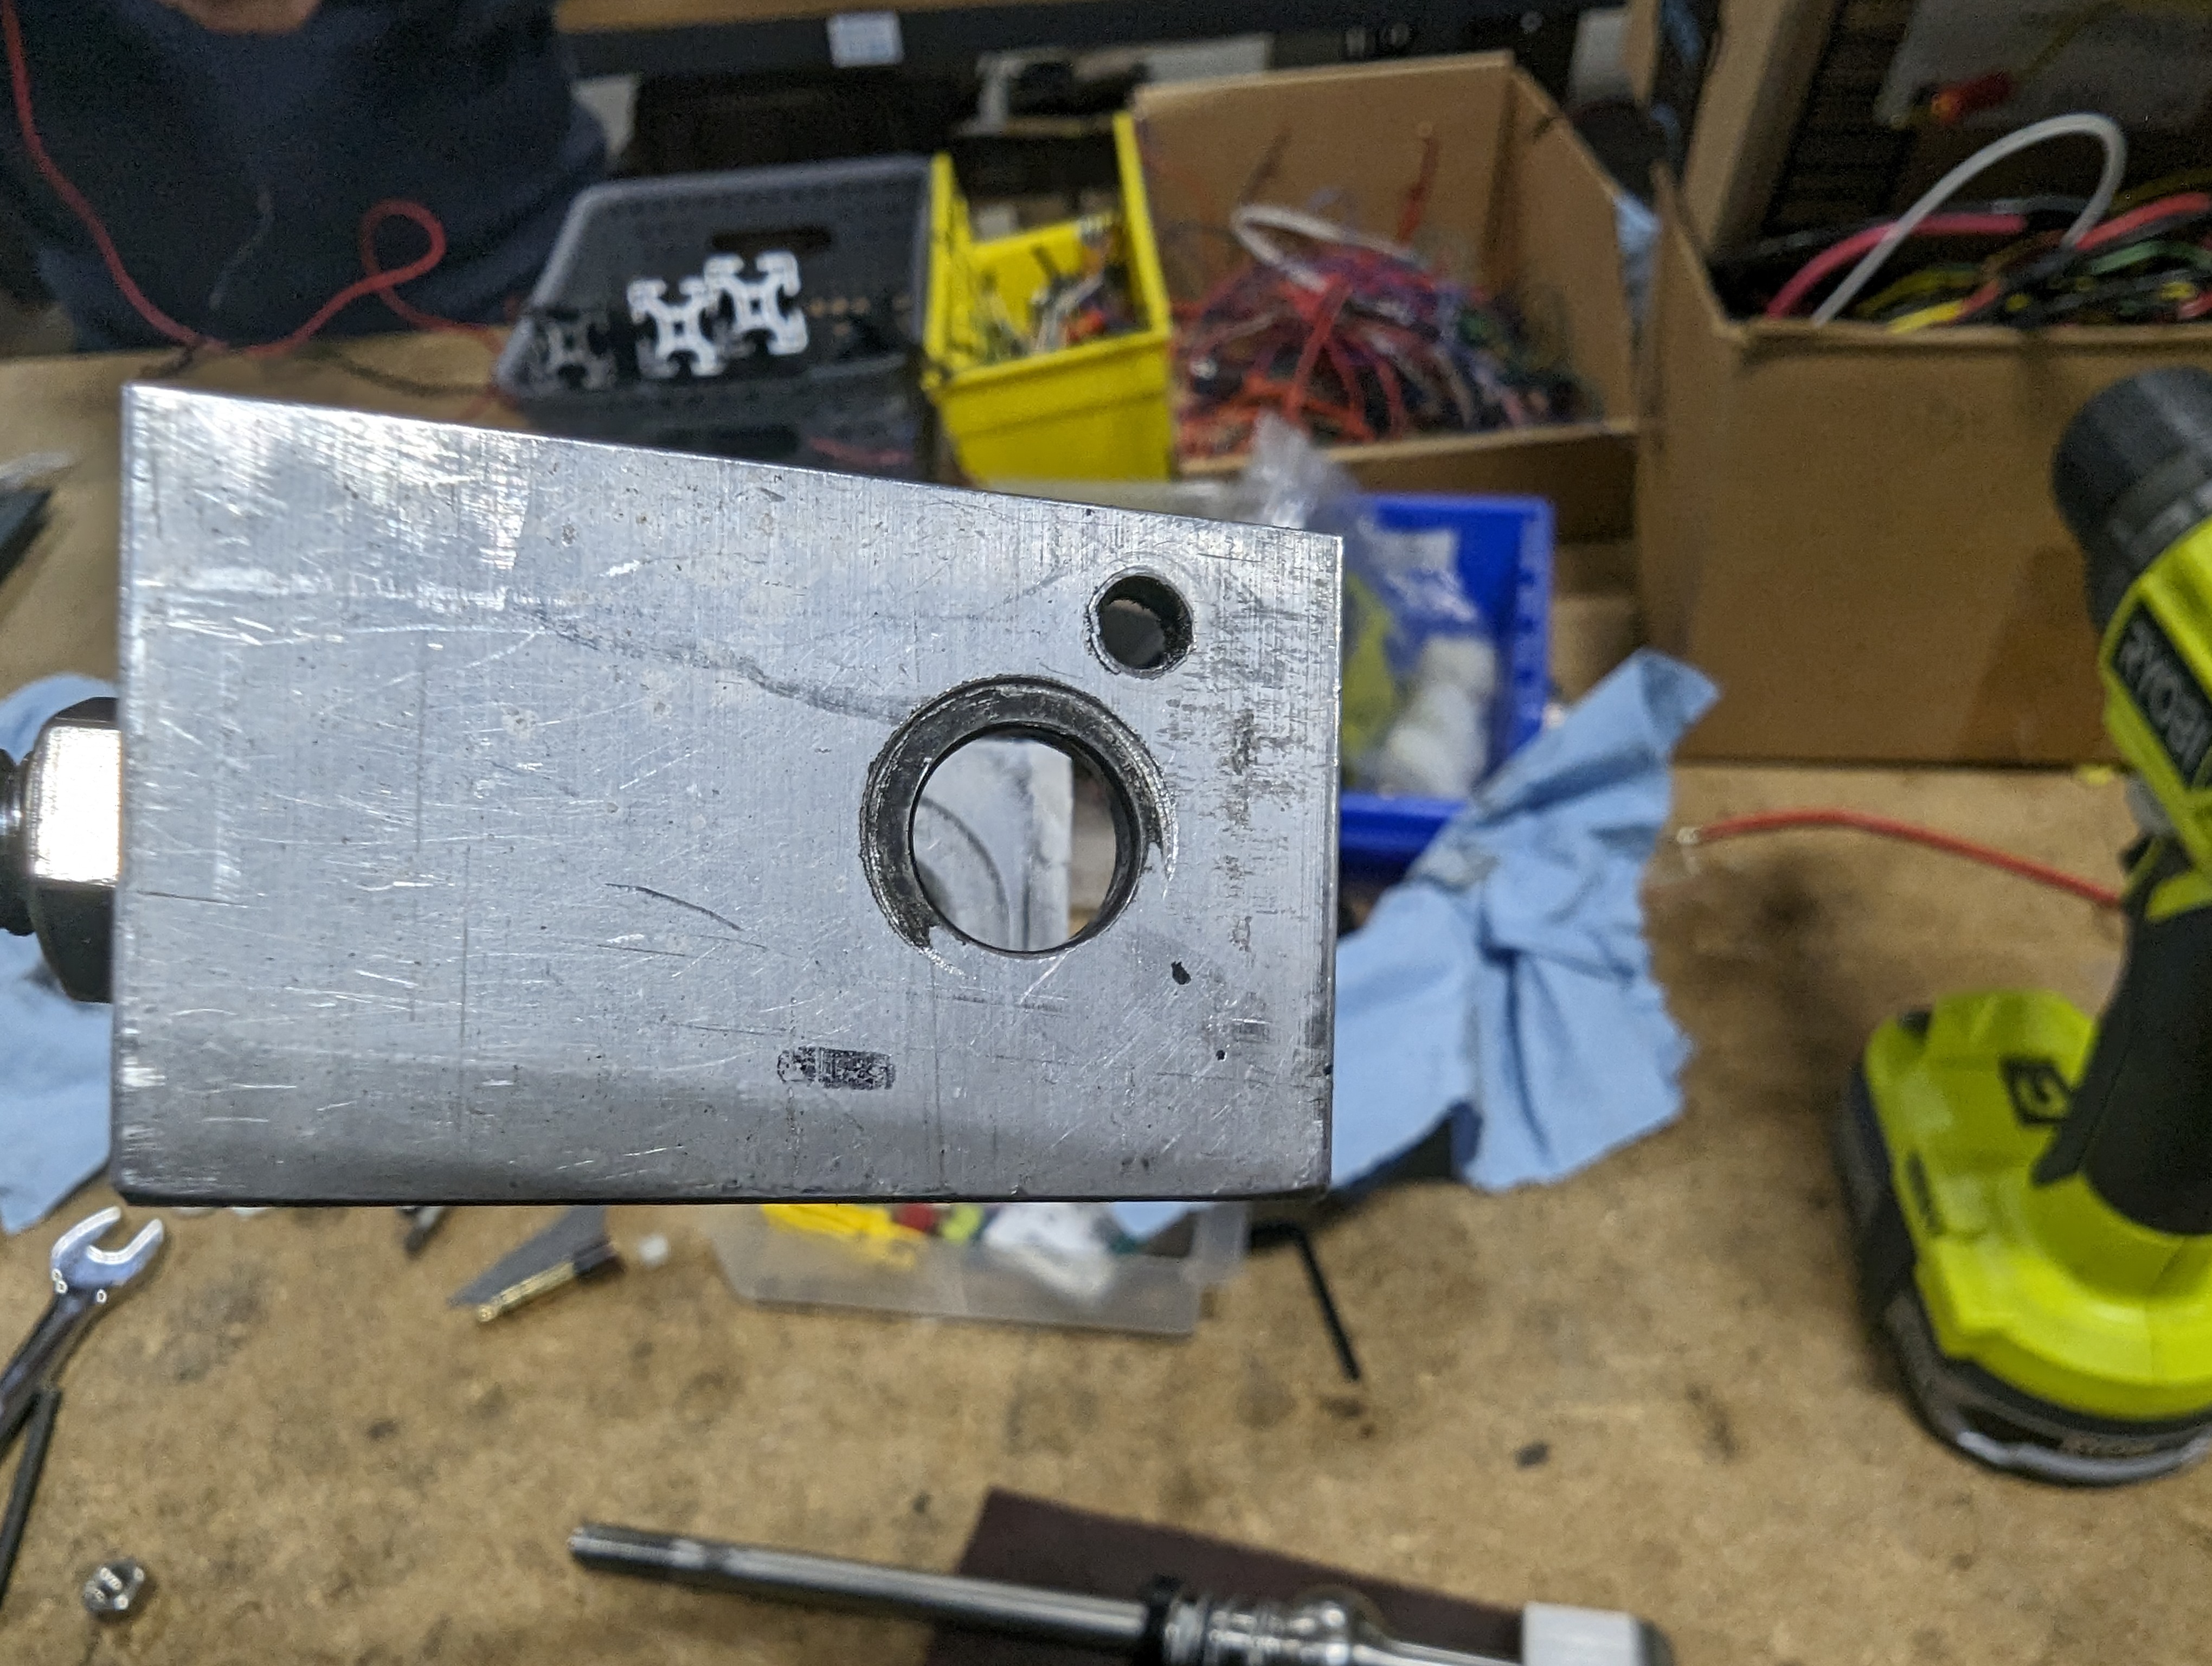 Significant wear seen on the aluminum linkage bracket